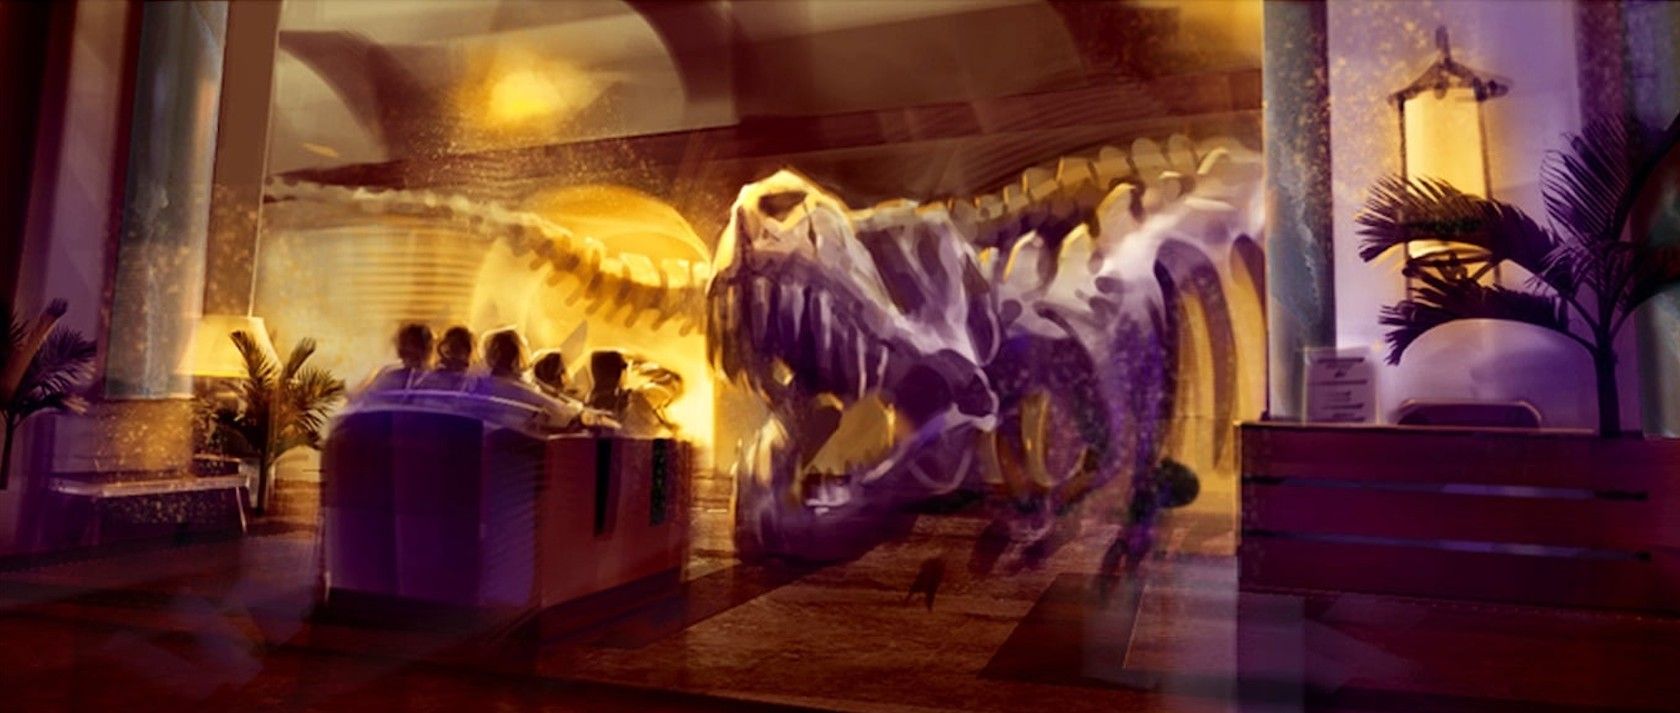 Night At The Museum Theme Park Ride Art Reveals Cancelled Concept Details